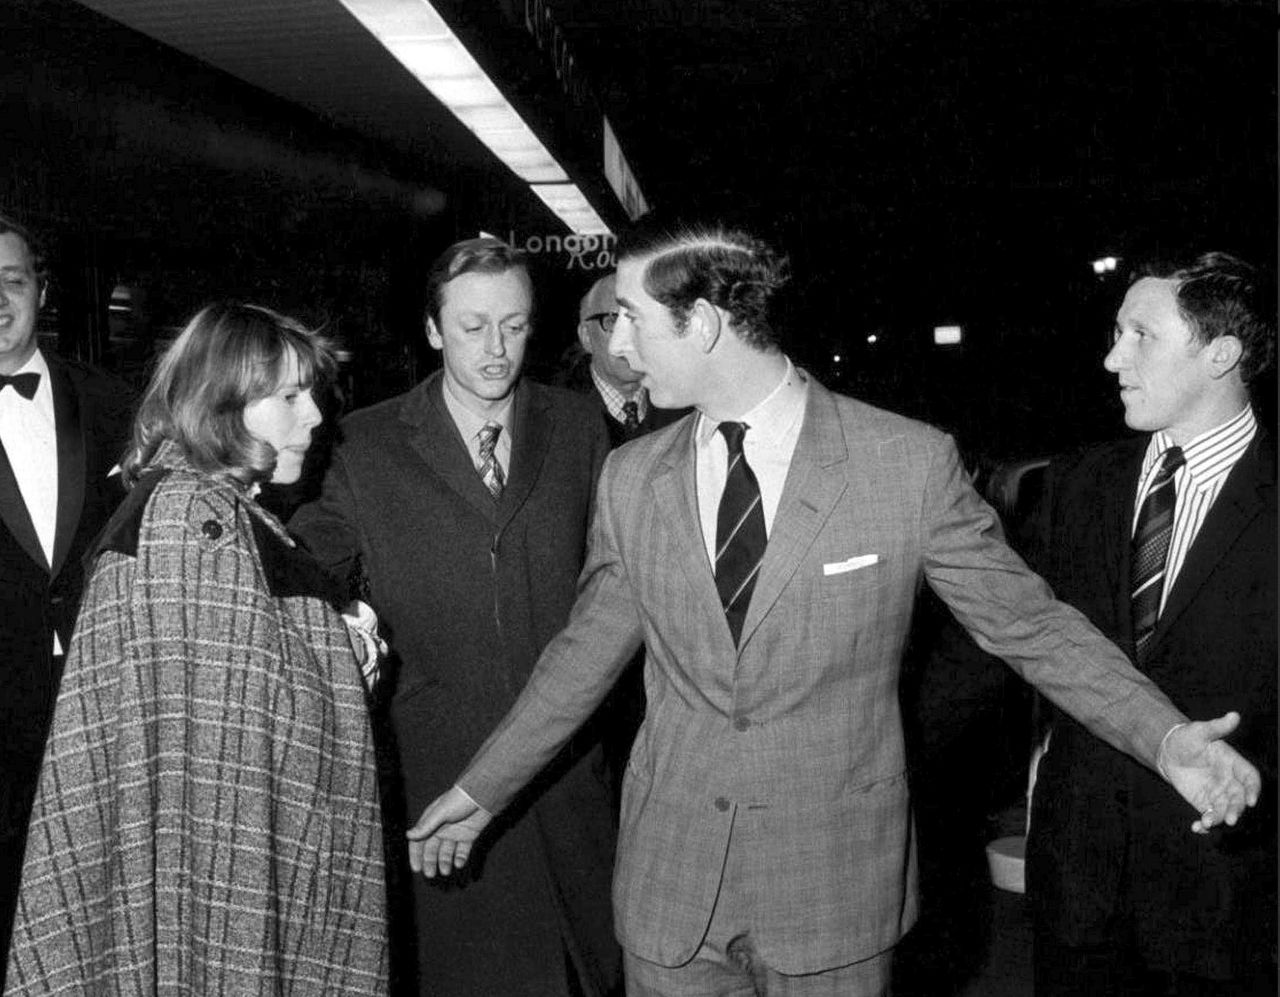 Camilla and her husband, Andrew, leave the Royal Opera House with Prince Charles in February 1975. Camilla and Charles reportedly met at a polo match in 1970 and became friends.